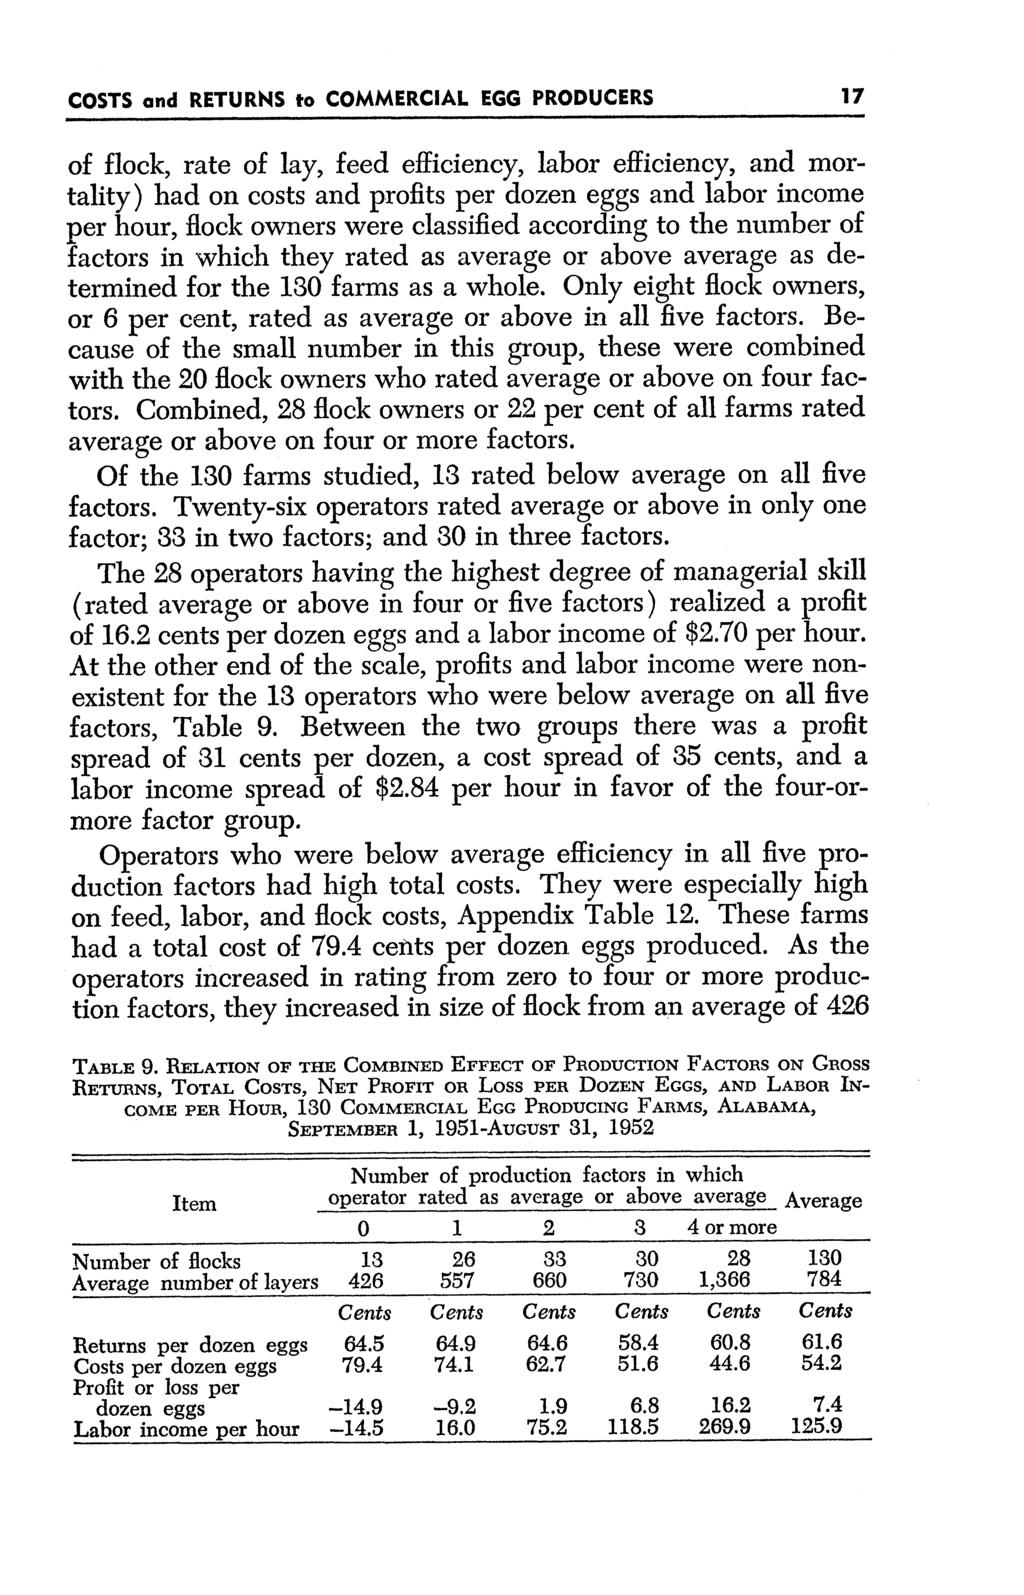 COSTS and RETURNS to COMMERCIAL EGG PRODUCERS 17 of flock, rate of lay, feed efficiency, labor efficiency, and mortality) had on costs and profits per dozen eggs and labor income per hour, flock